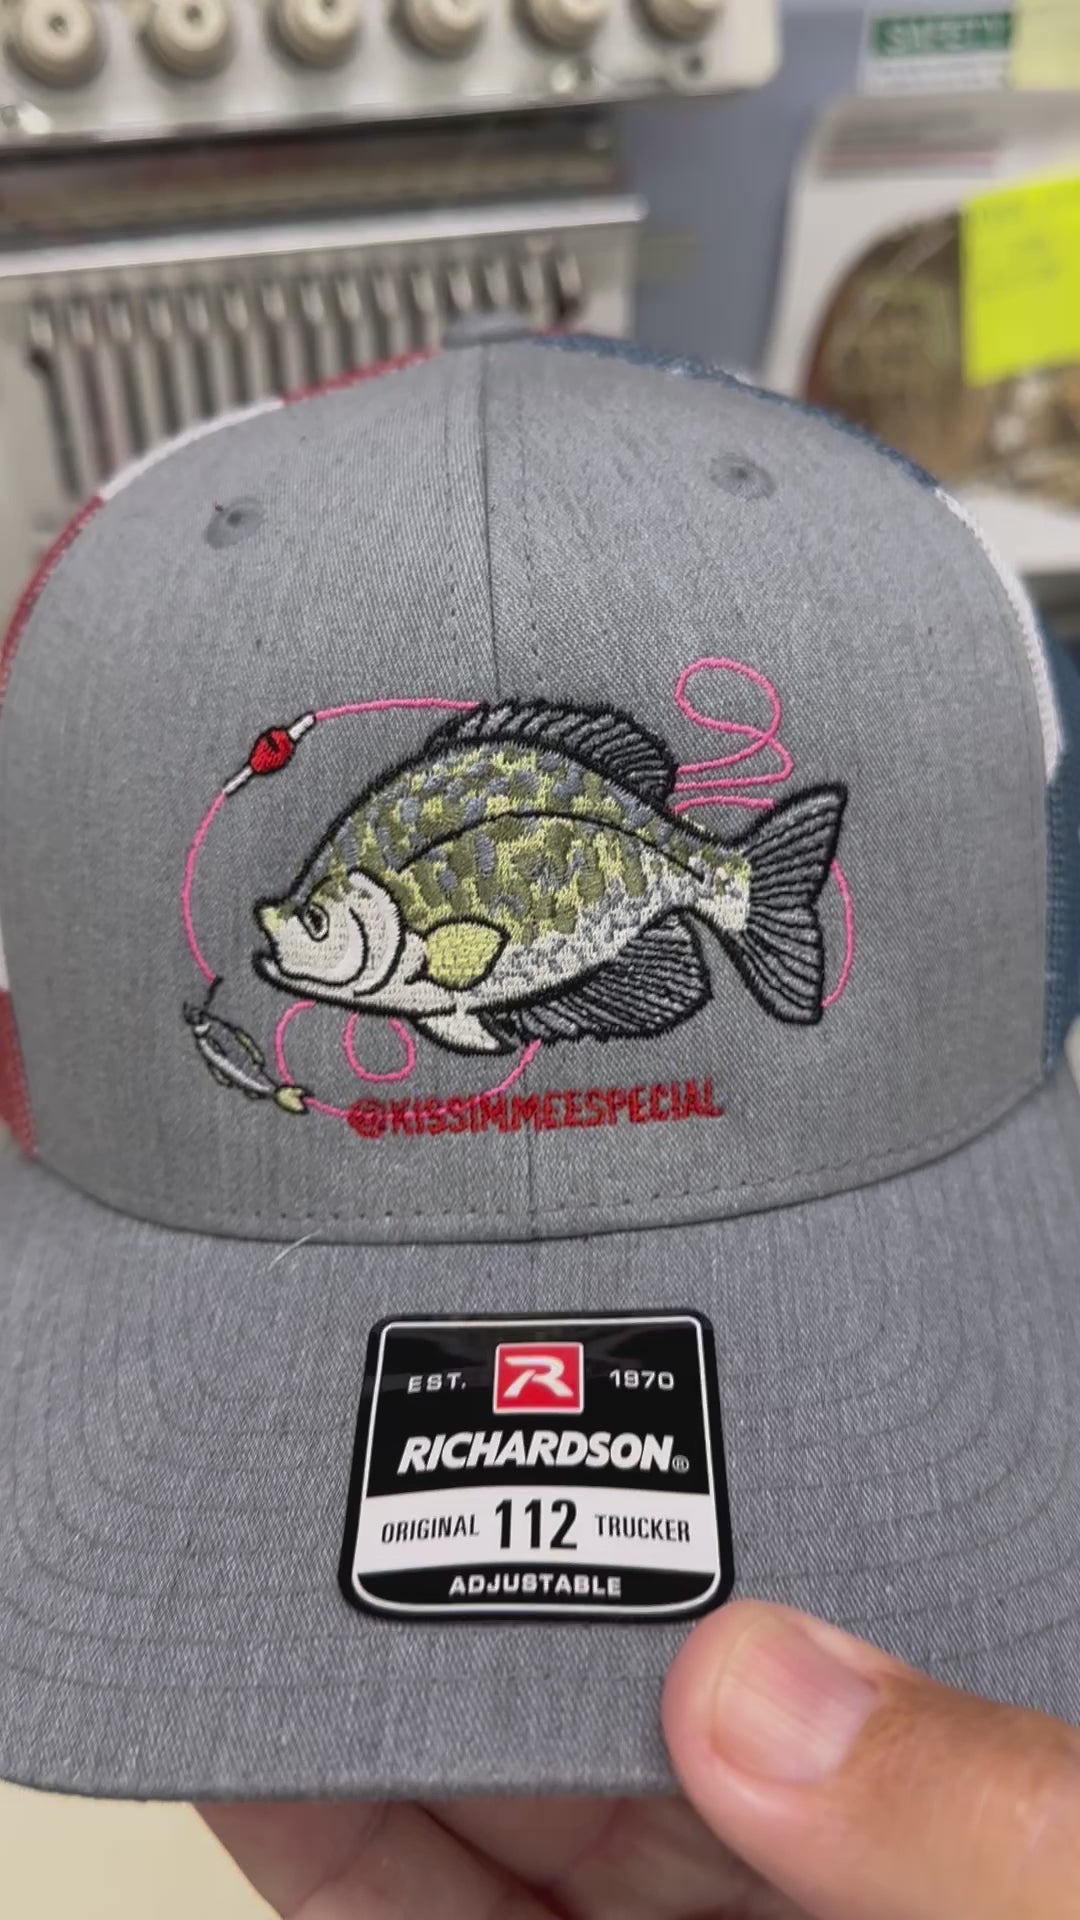 KISSIMMEESPECIAL CRAPPIE HAT – Kissimmeespecial